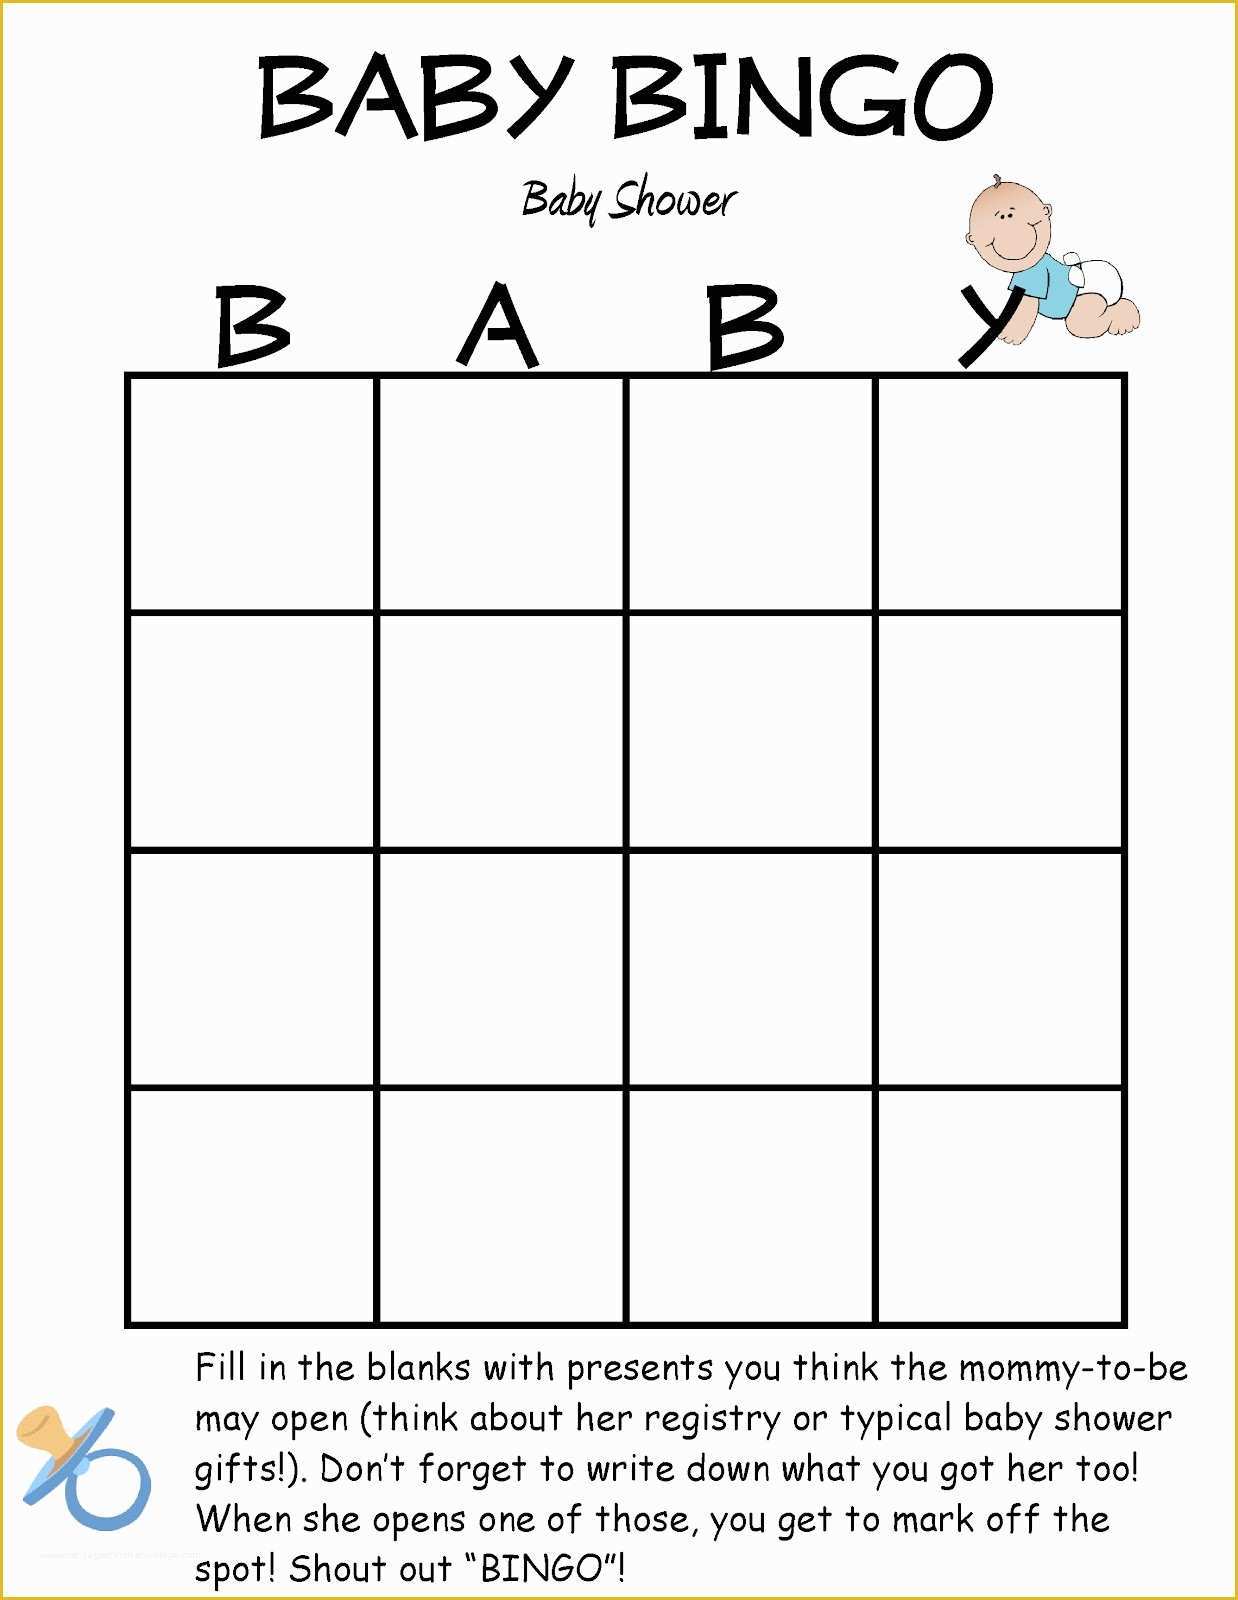 Free Baby Shower Bingo Blank Template Of Our Suburban Farm Owl themed Baby Shower